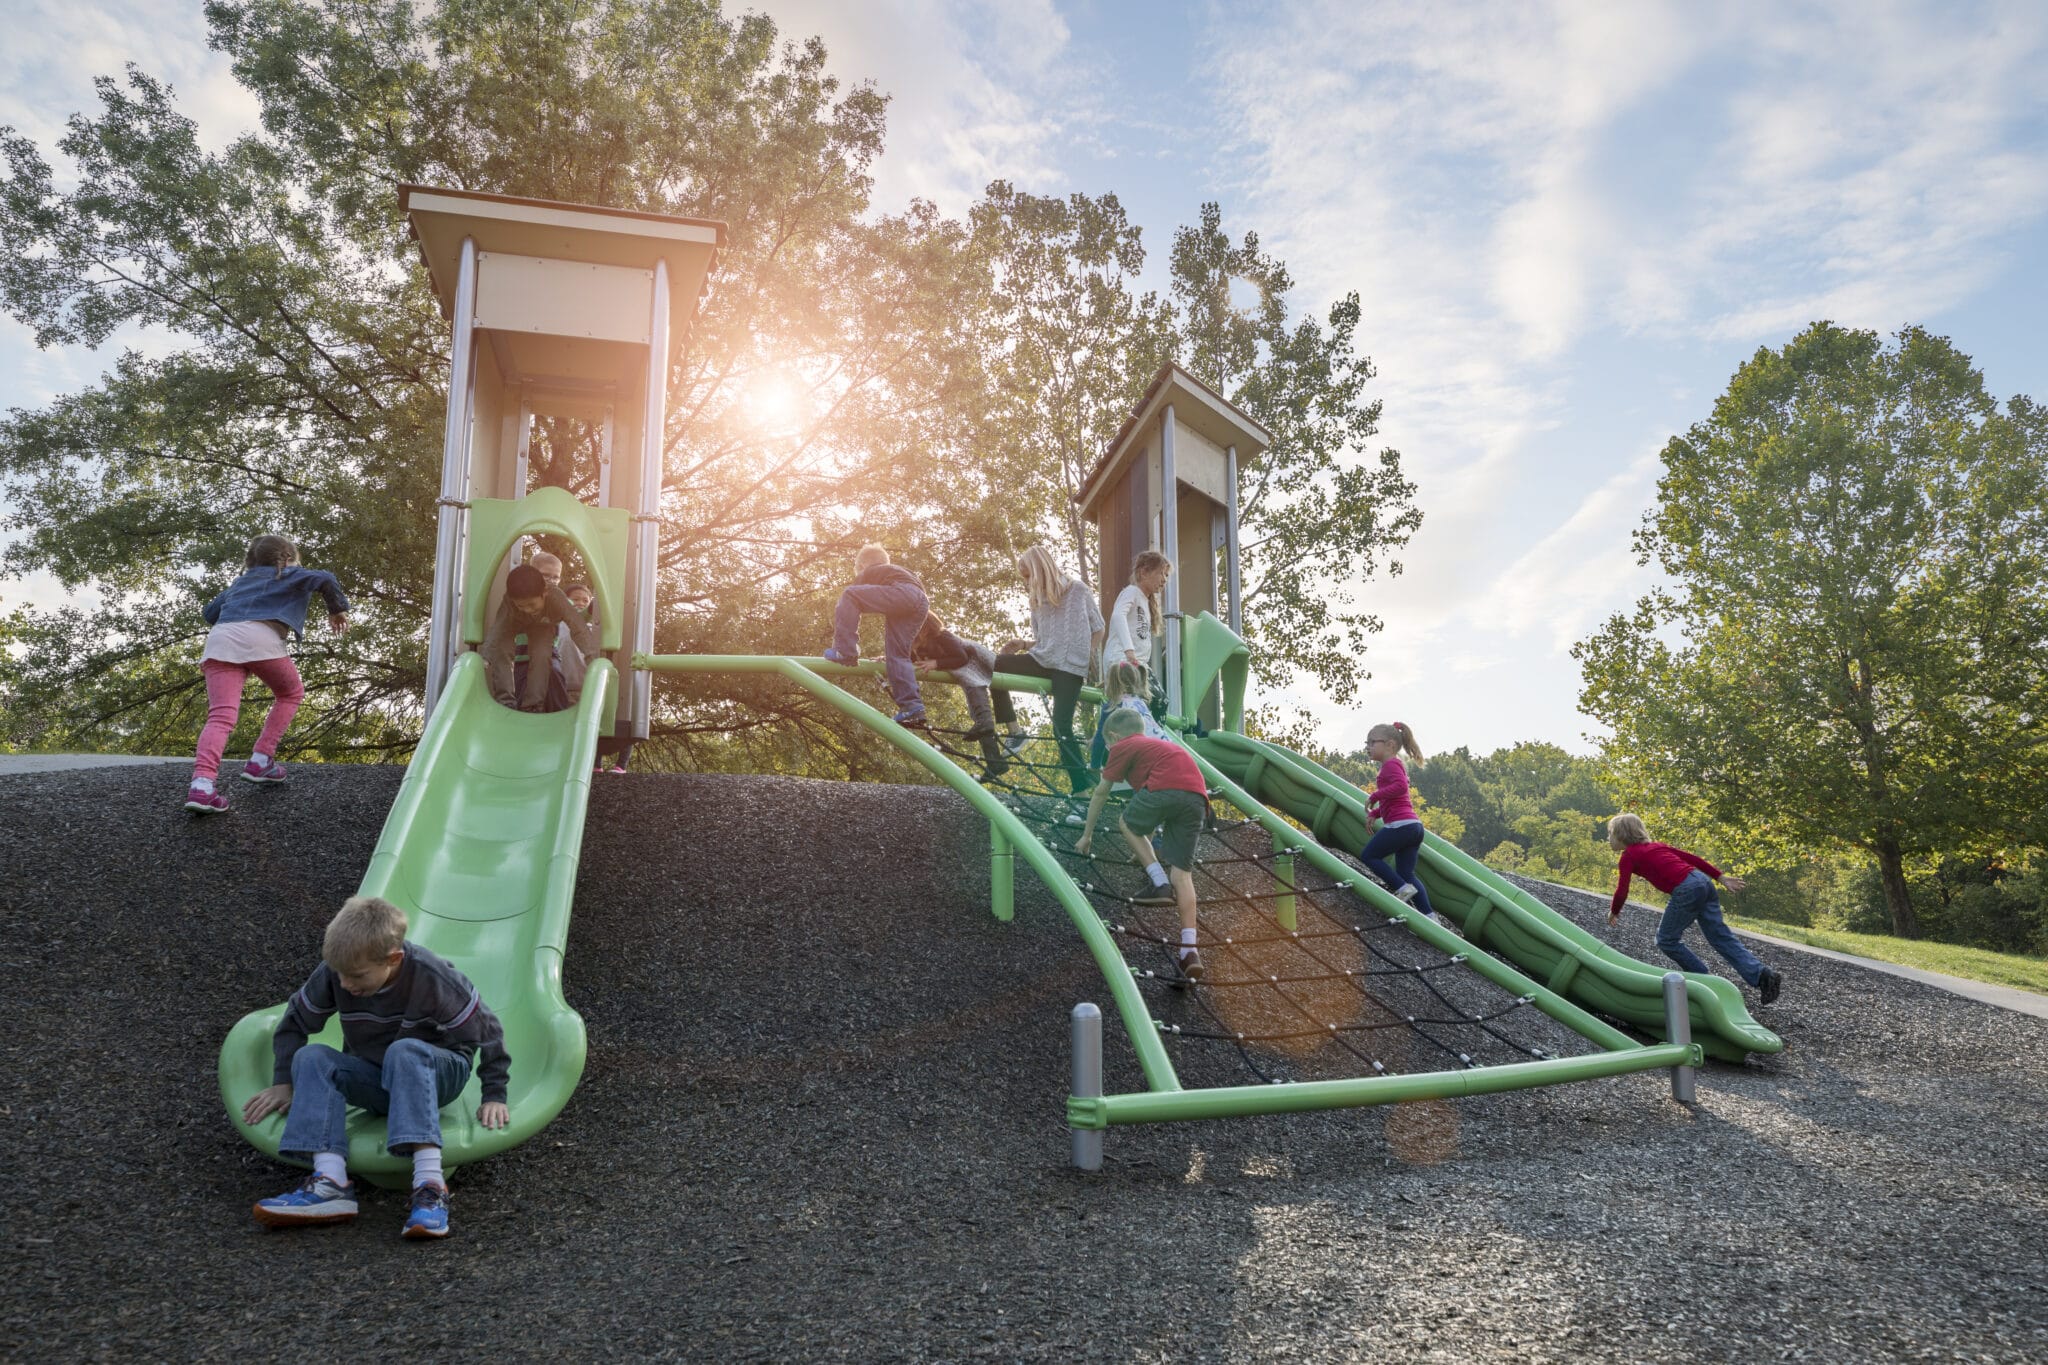 Why Are Playgrounds So Crucial For a Child’s Development?